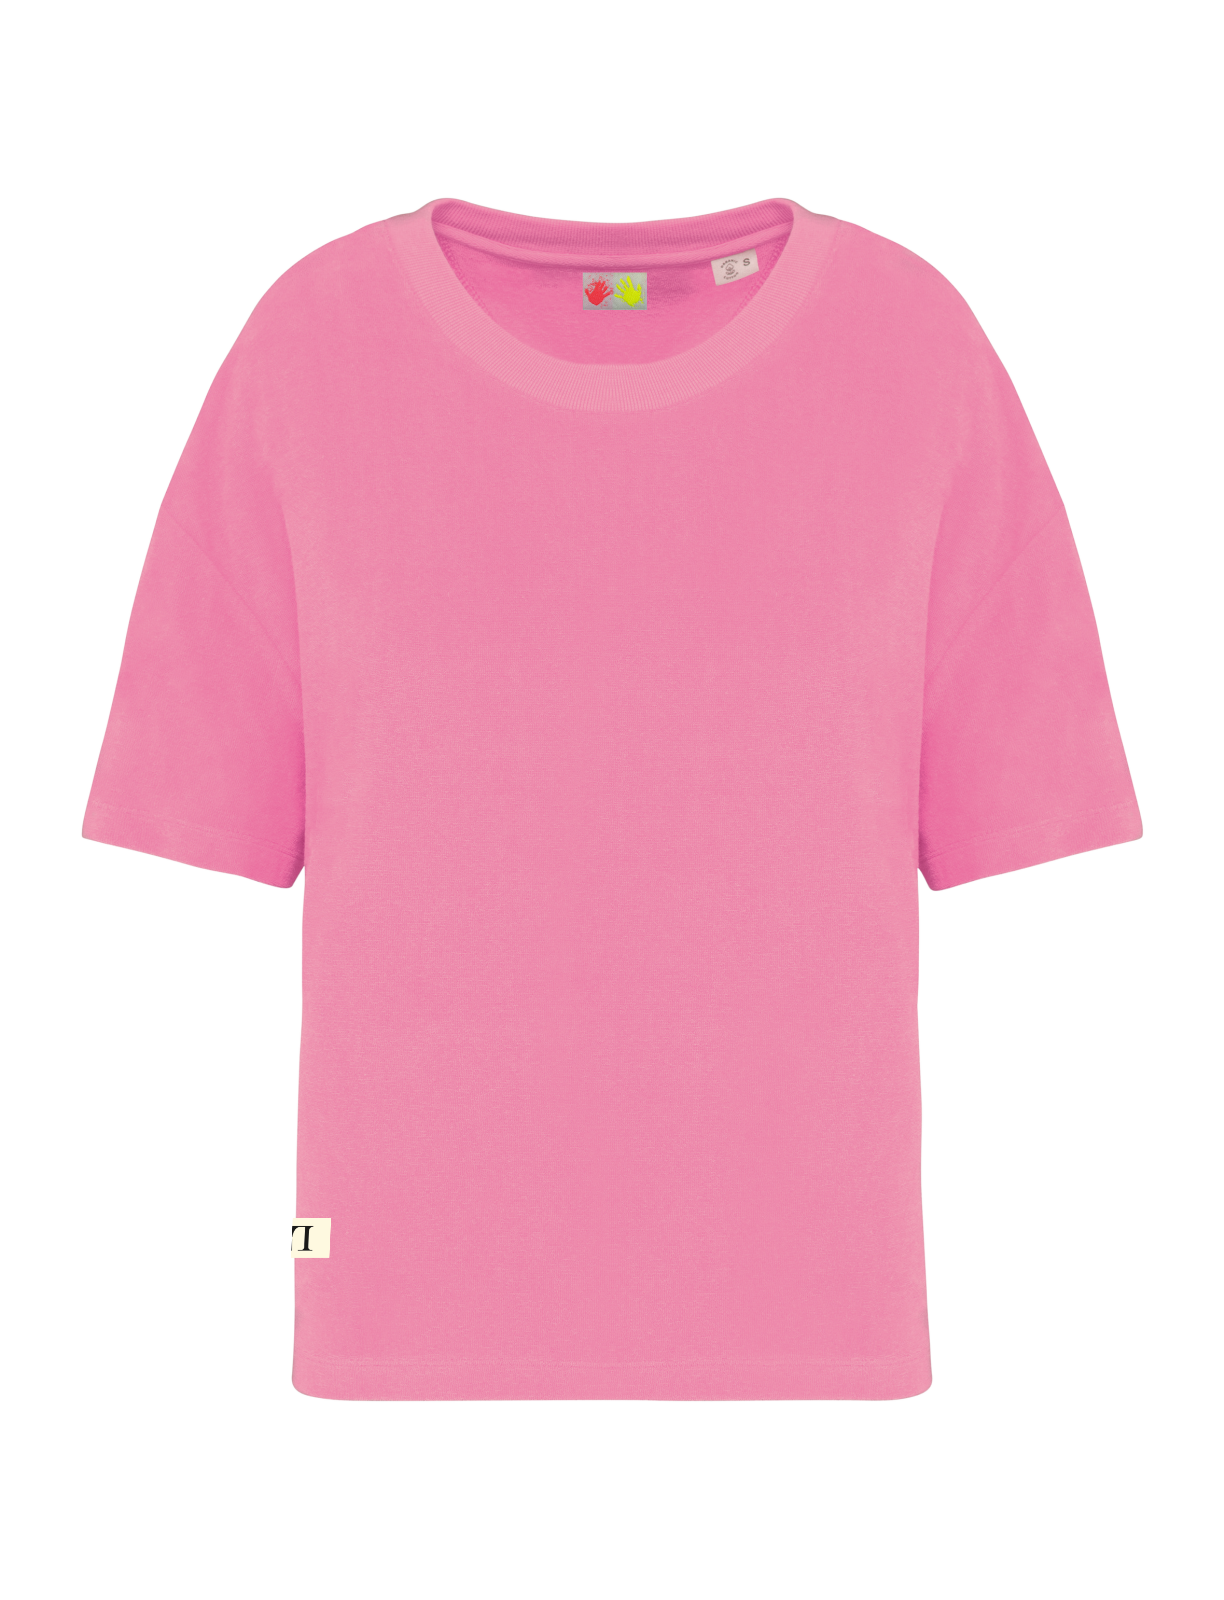 LL Terry Towel-T-Shirt candy rose von LiviaLeano